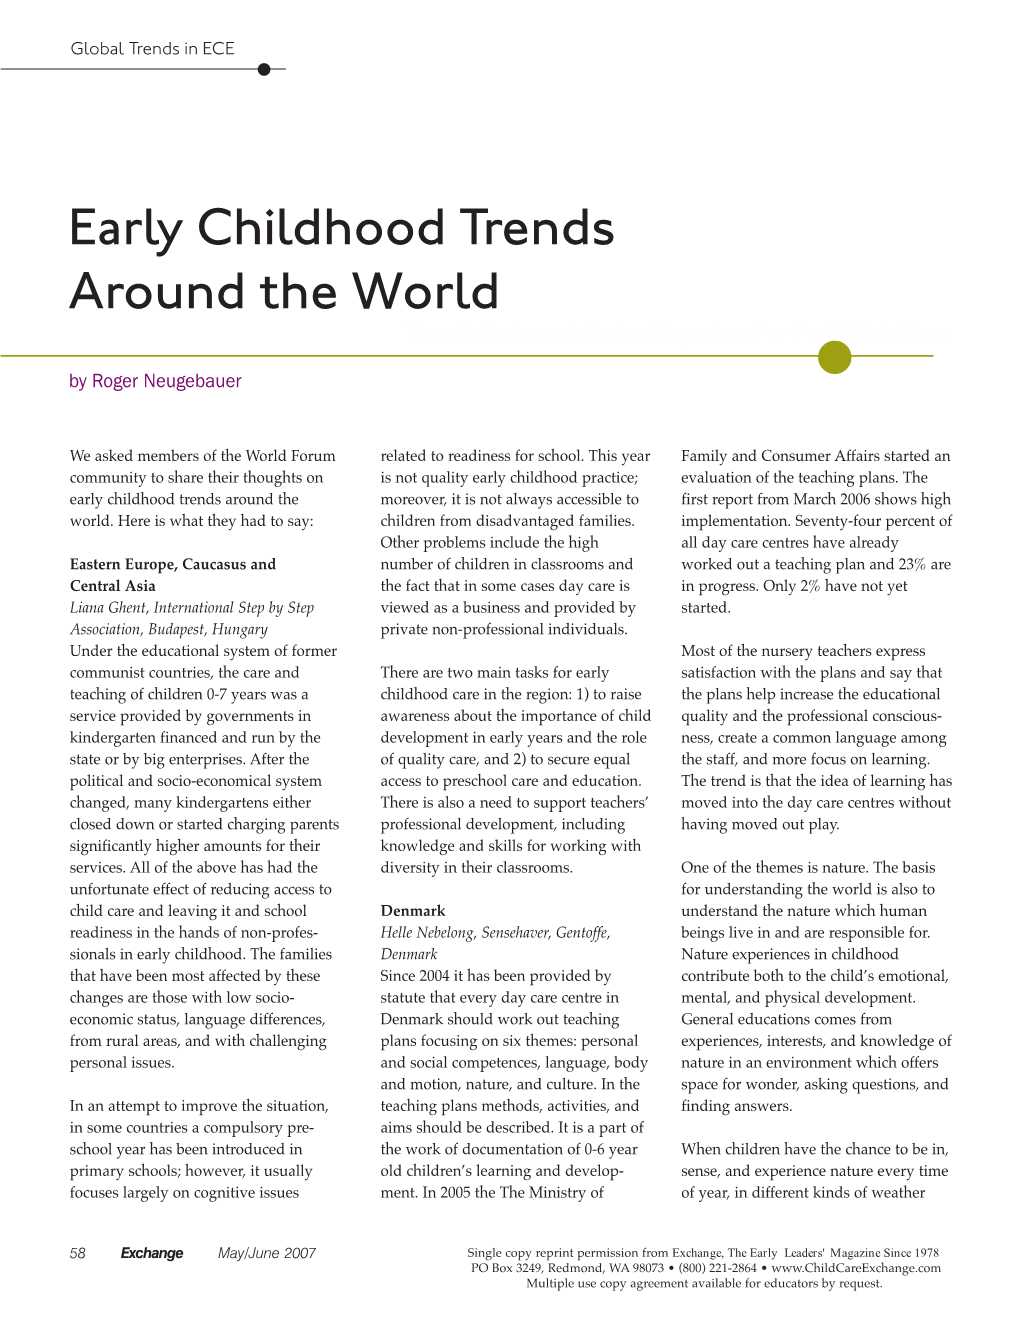 Early Childhood Trends Around the World Twentieth Annual Status Report on for Profit Child Care by Roger Neugebauer